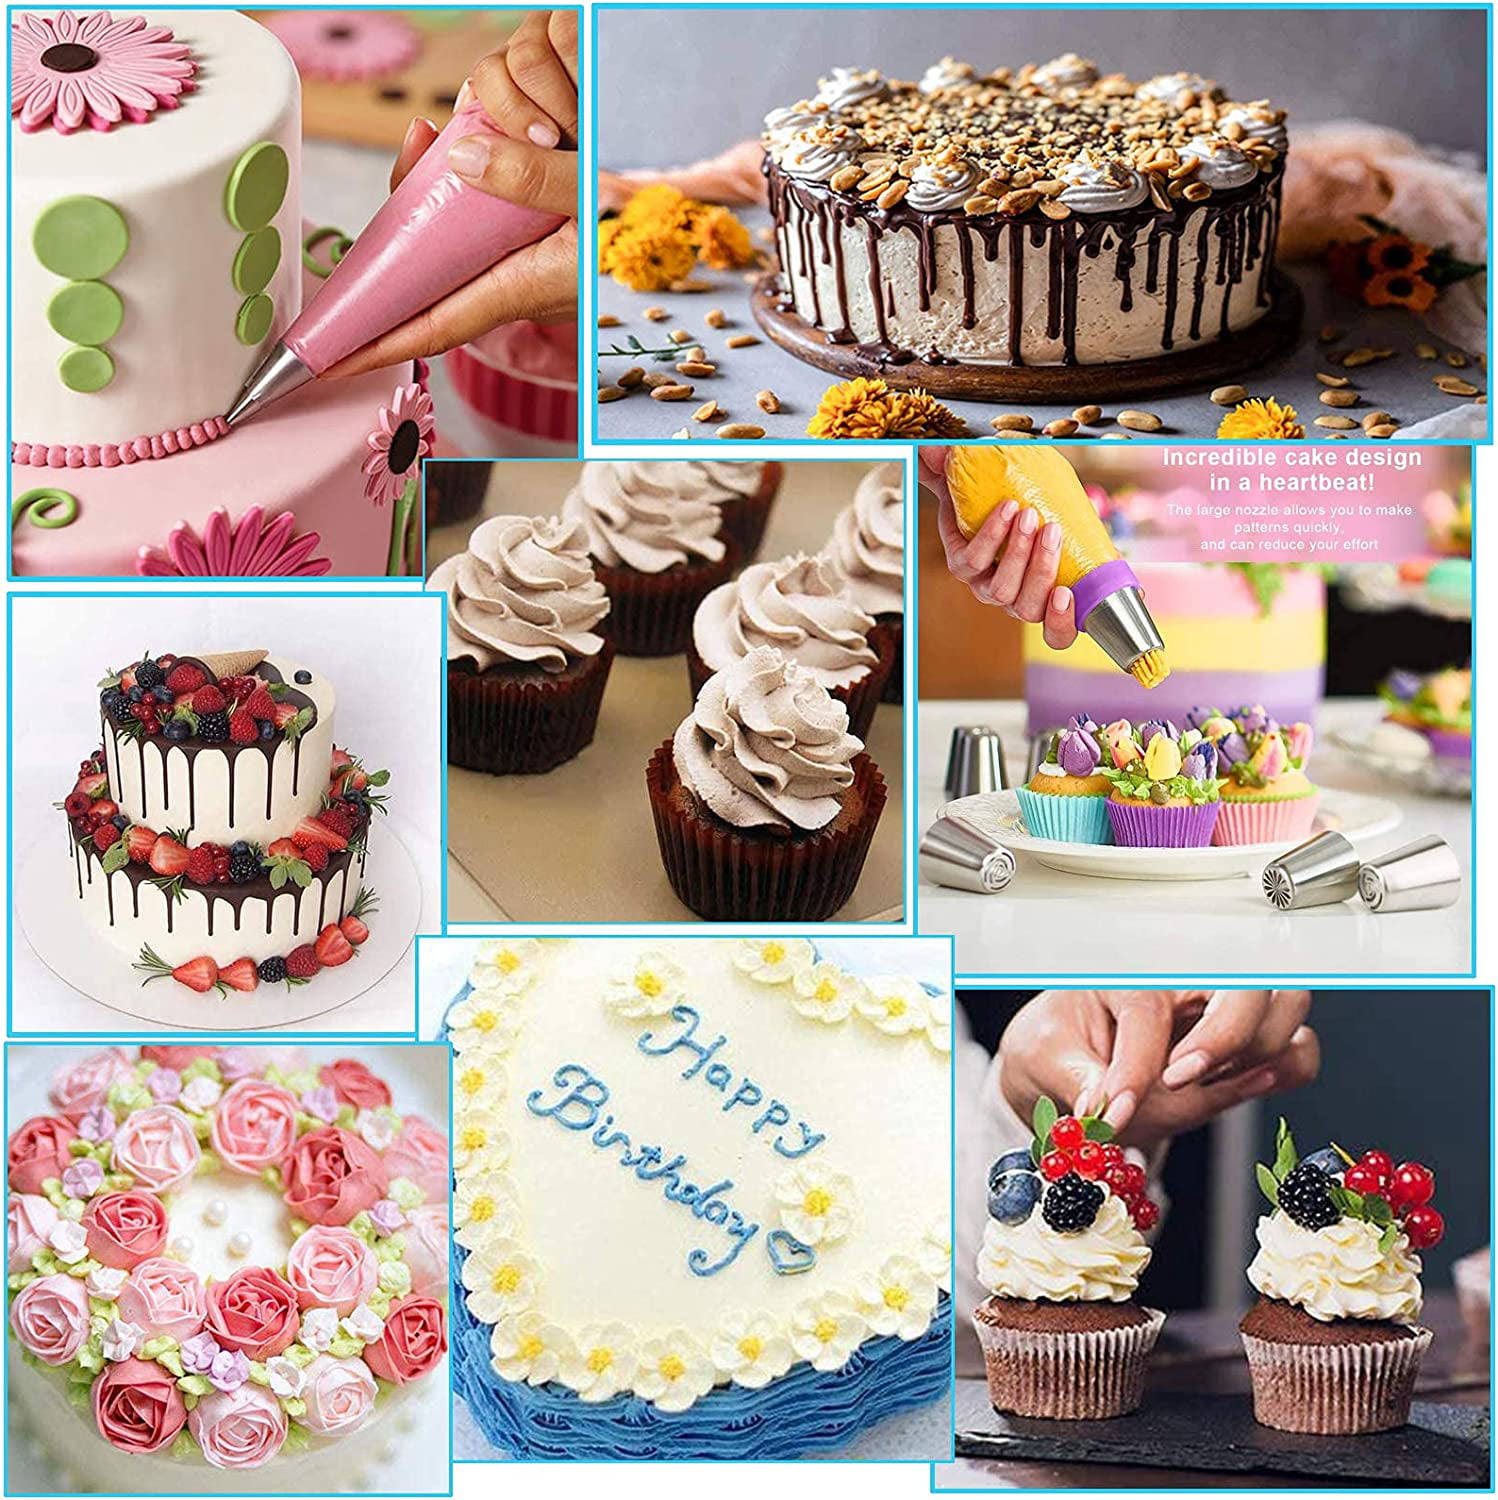 Best Baking Gadgets To Make & Decorate Cakes & Cupcakes